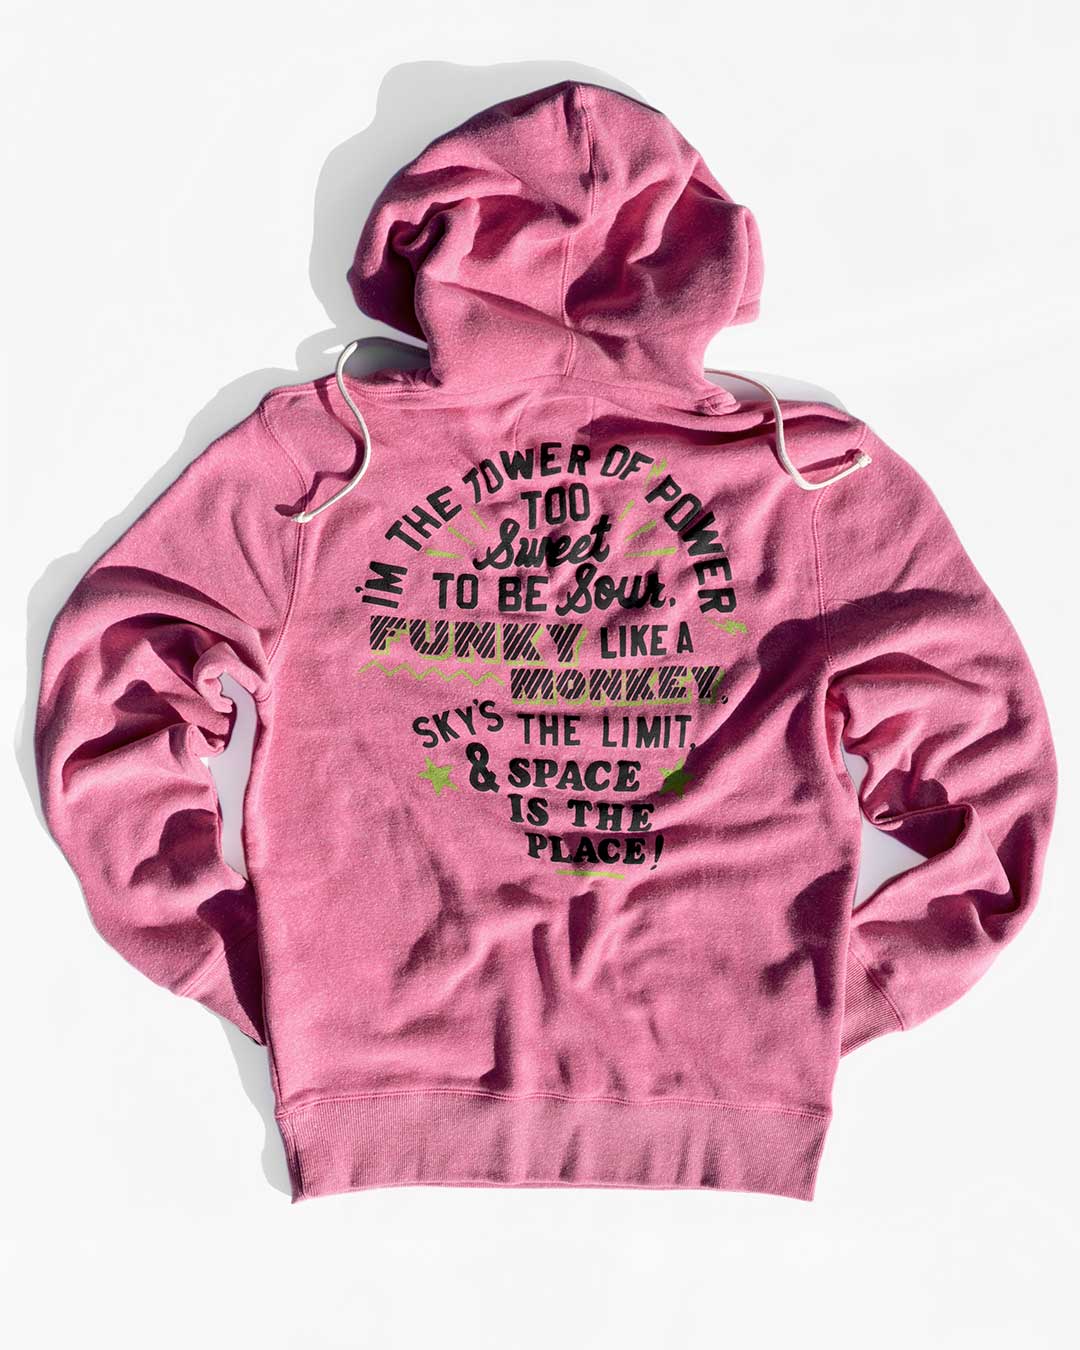 Macho Man Randy Savage Pink PO Hoody - Roots of Fight Canada